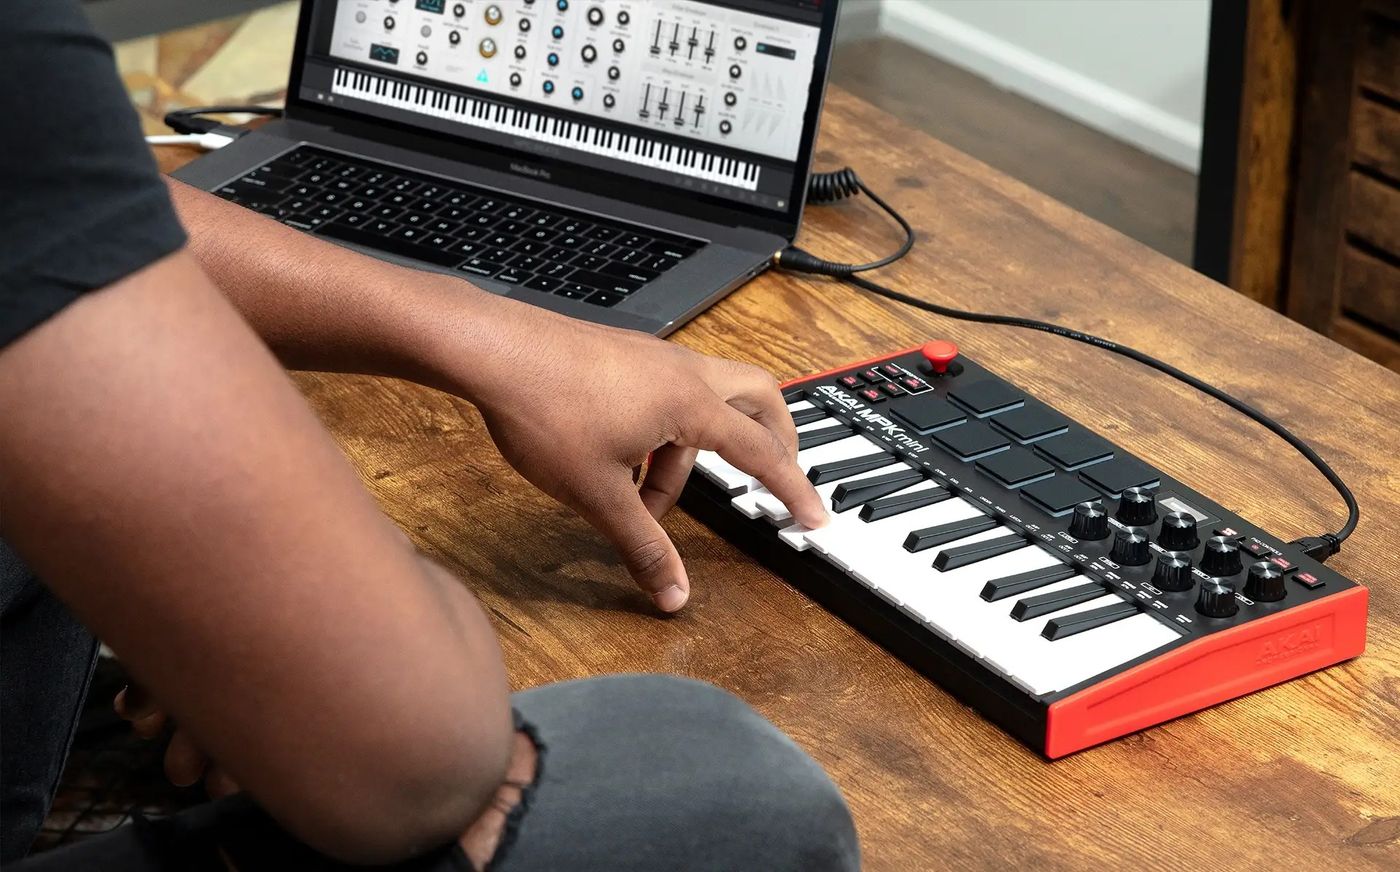 How To Add Sounds To Your MIDI Keyboard